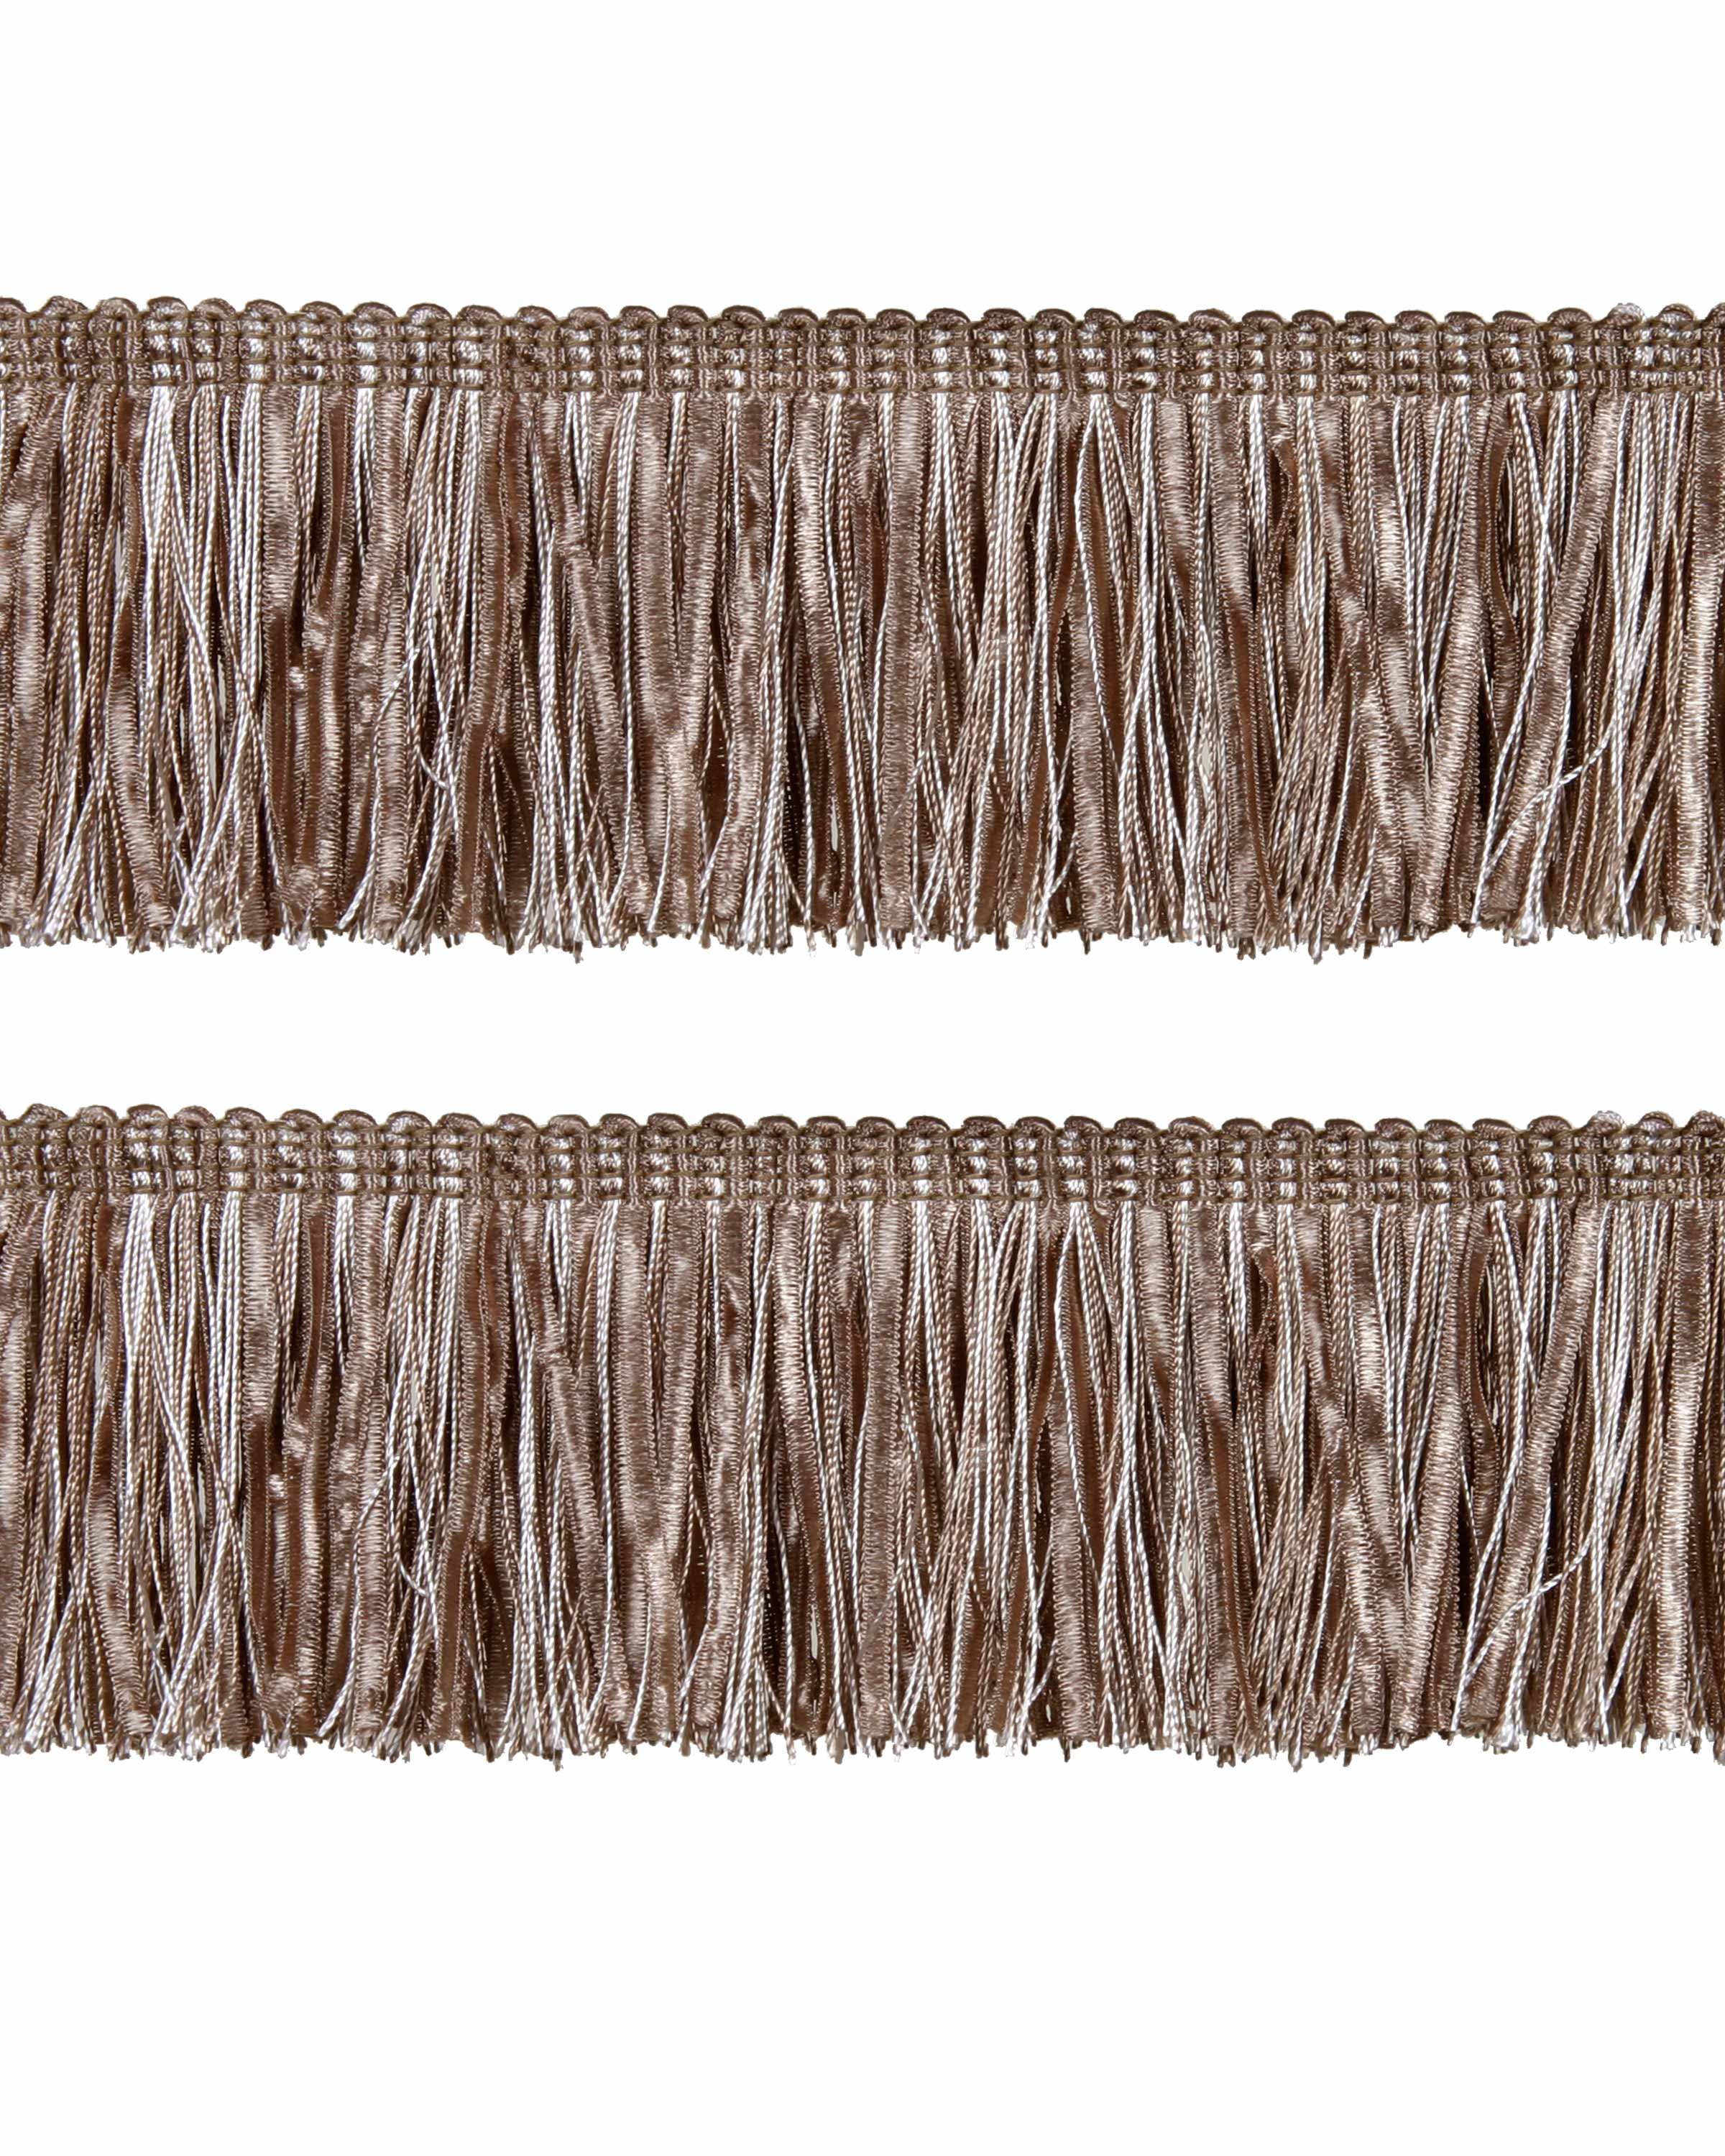 Bullion Fringe with Ribbons - Silvery Taupe 60mm Price is for 5 metres